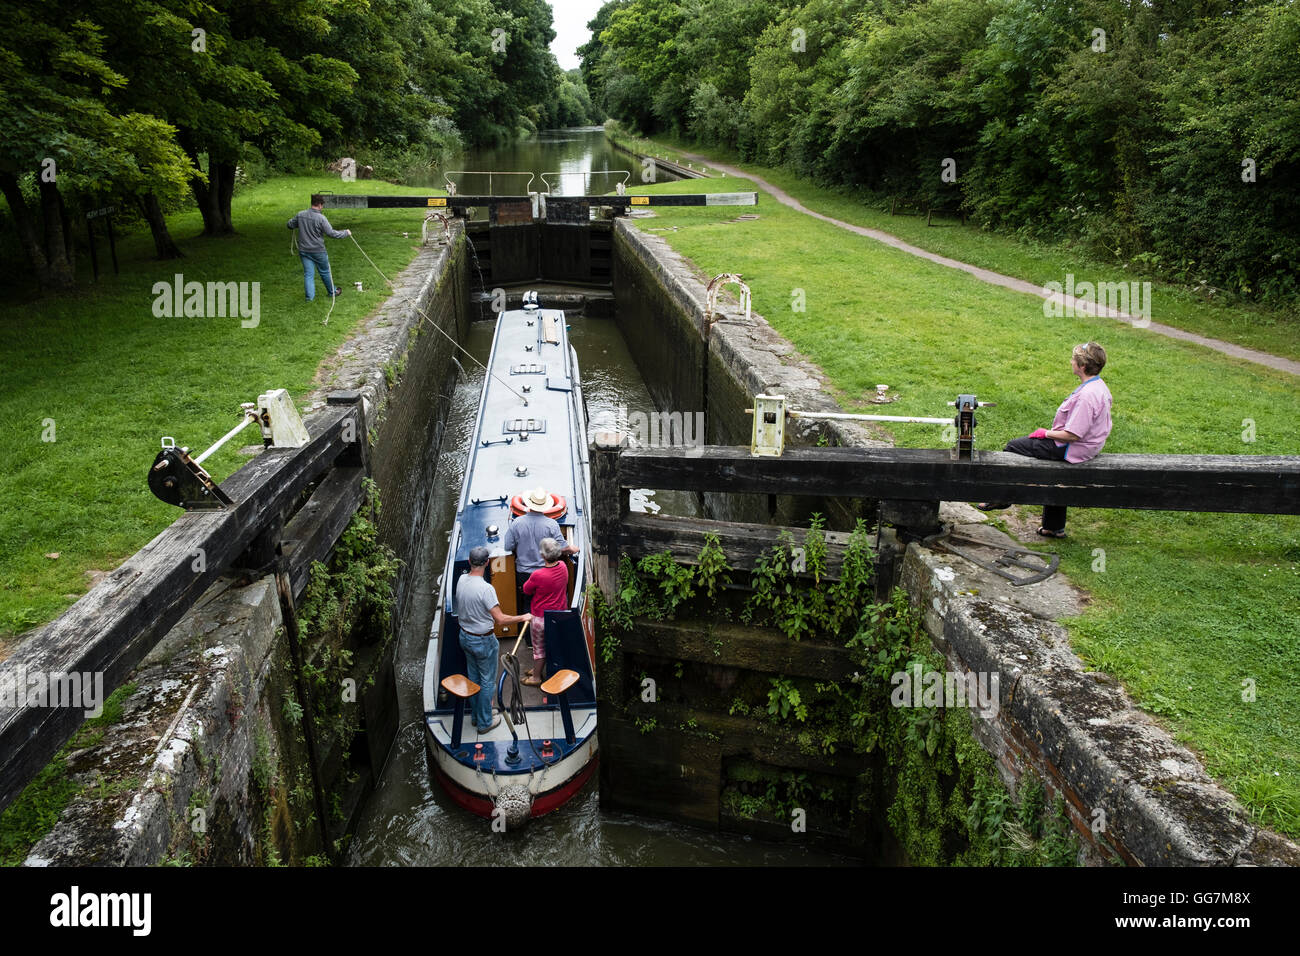 Narrow boat entering lock on Kennet and Avon Canal in Wiltshire England, United Kingdom Stock Photo